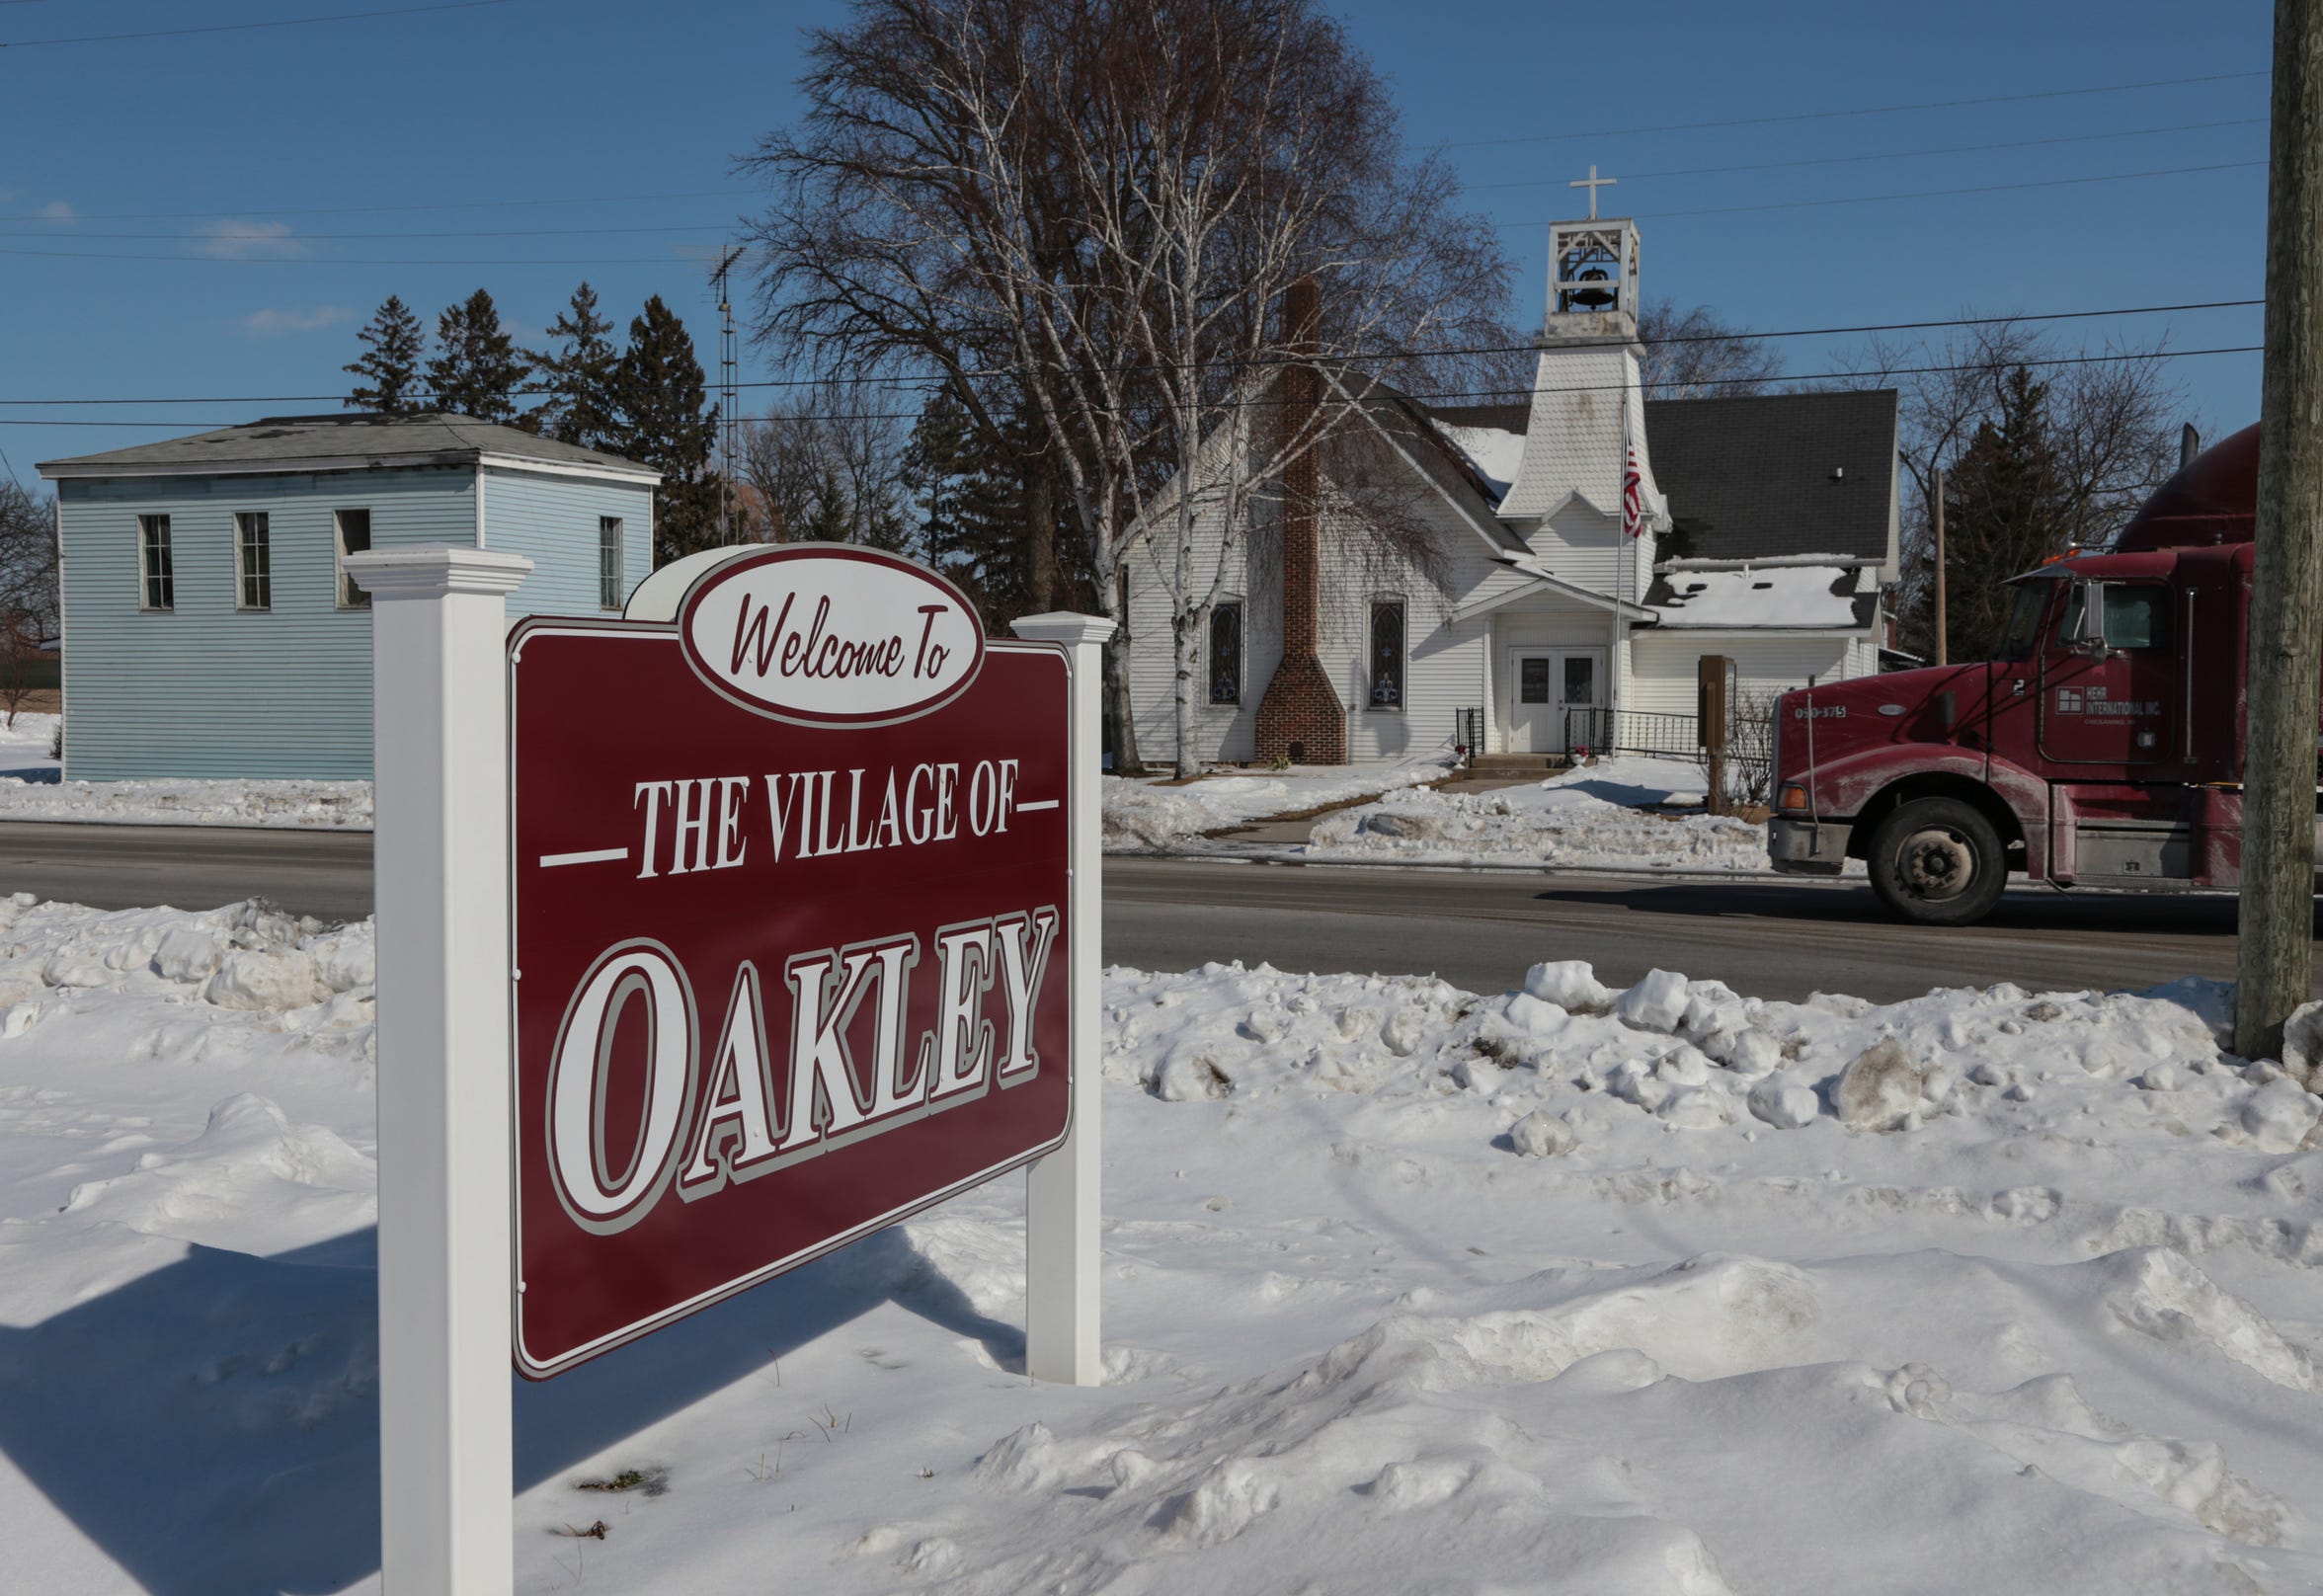 Traffic moves long Main Street in the village of Oakley, MI on Monday March 2, 2015. The small community once had nearly 150 reserve officers.